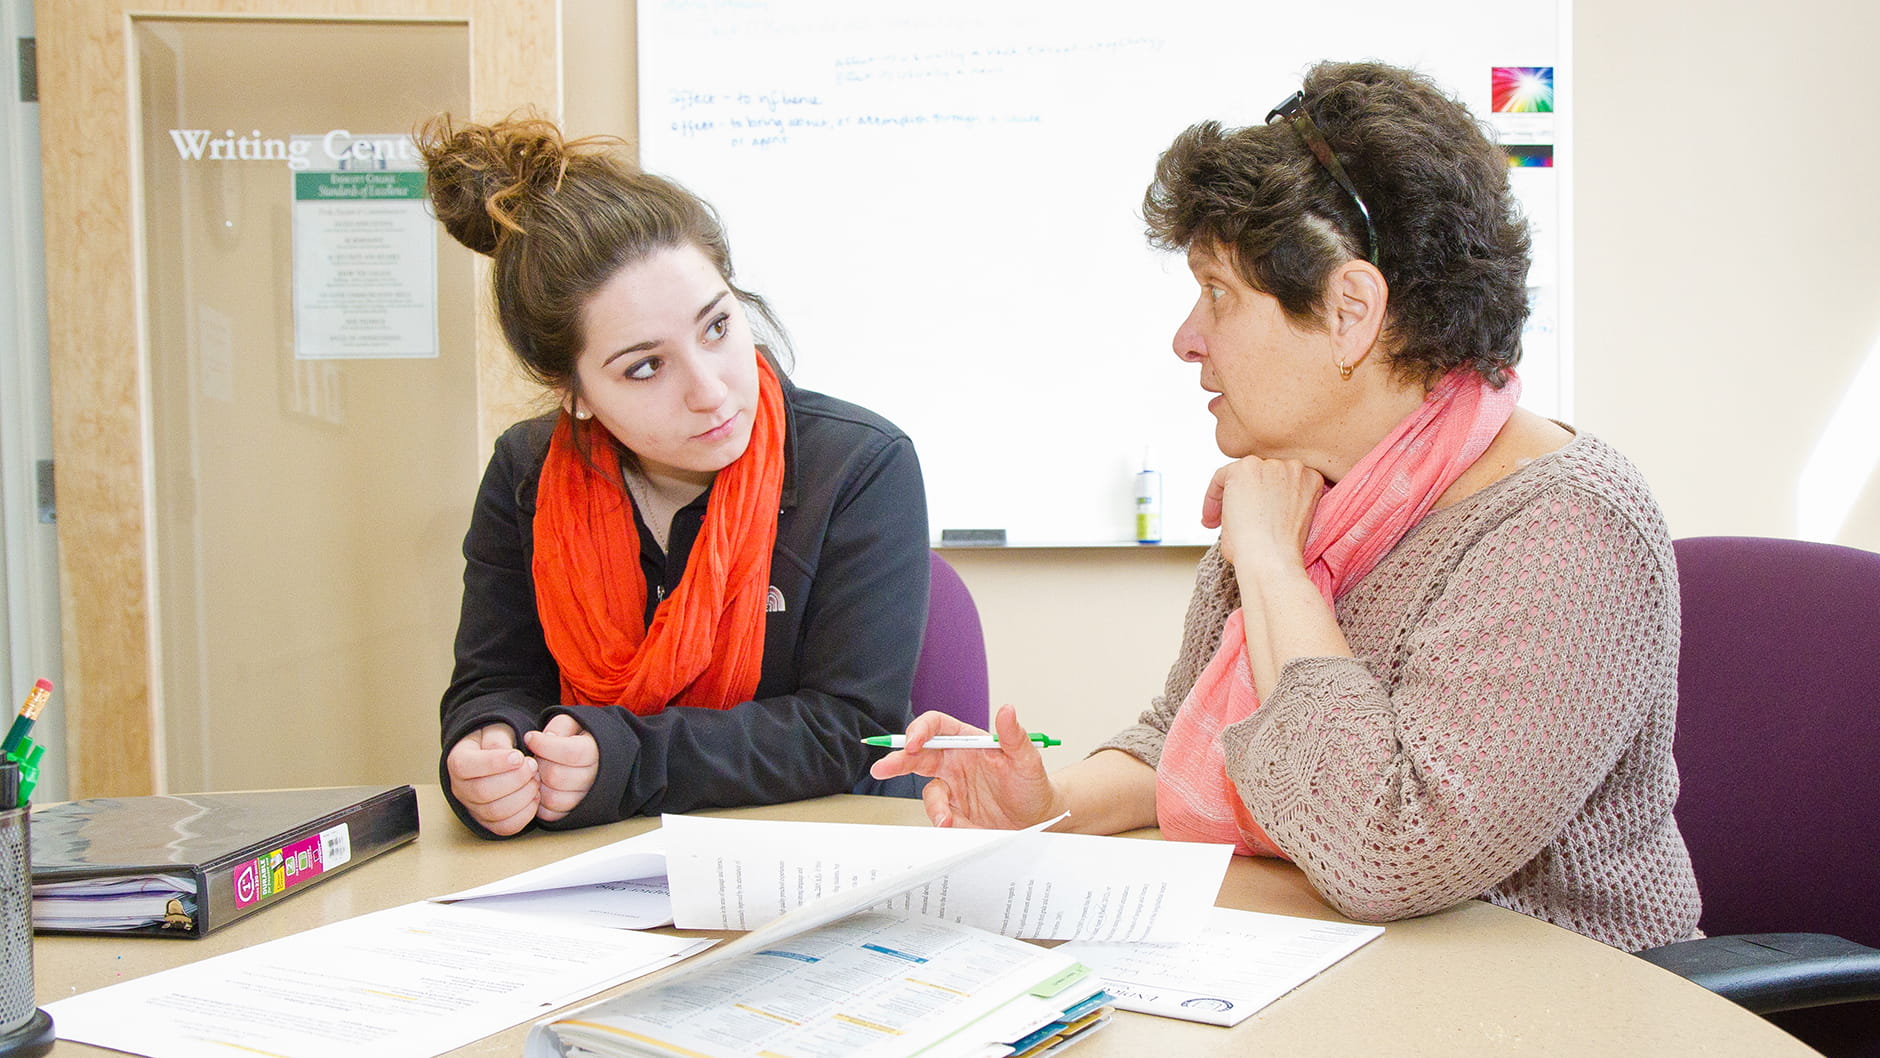 Student and Advisor converse while looking over documents and notes in Endicott classroom